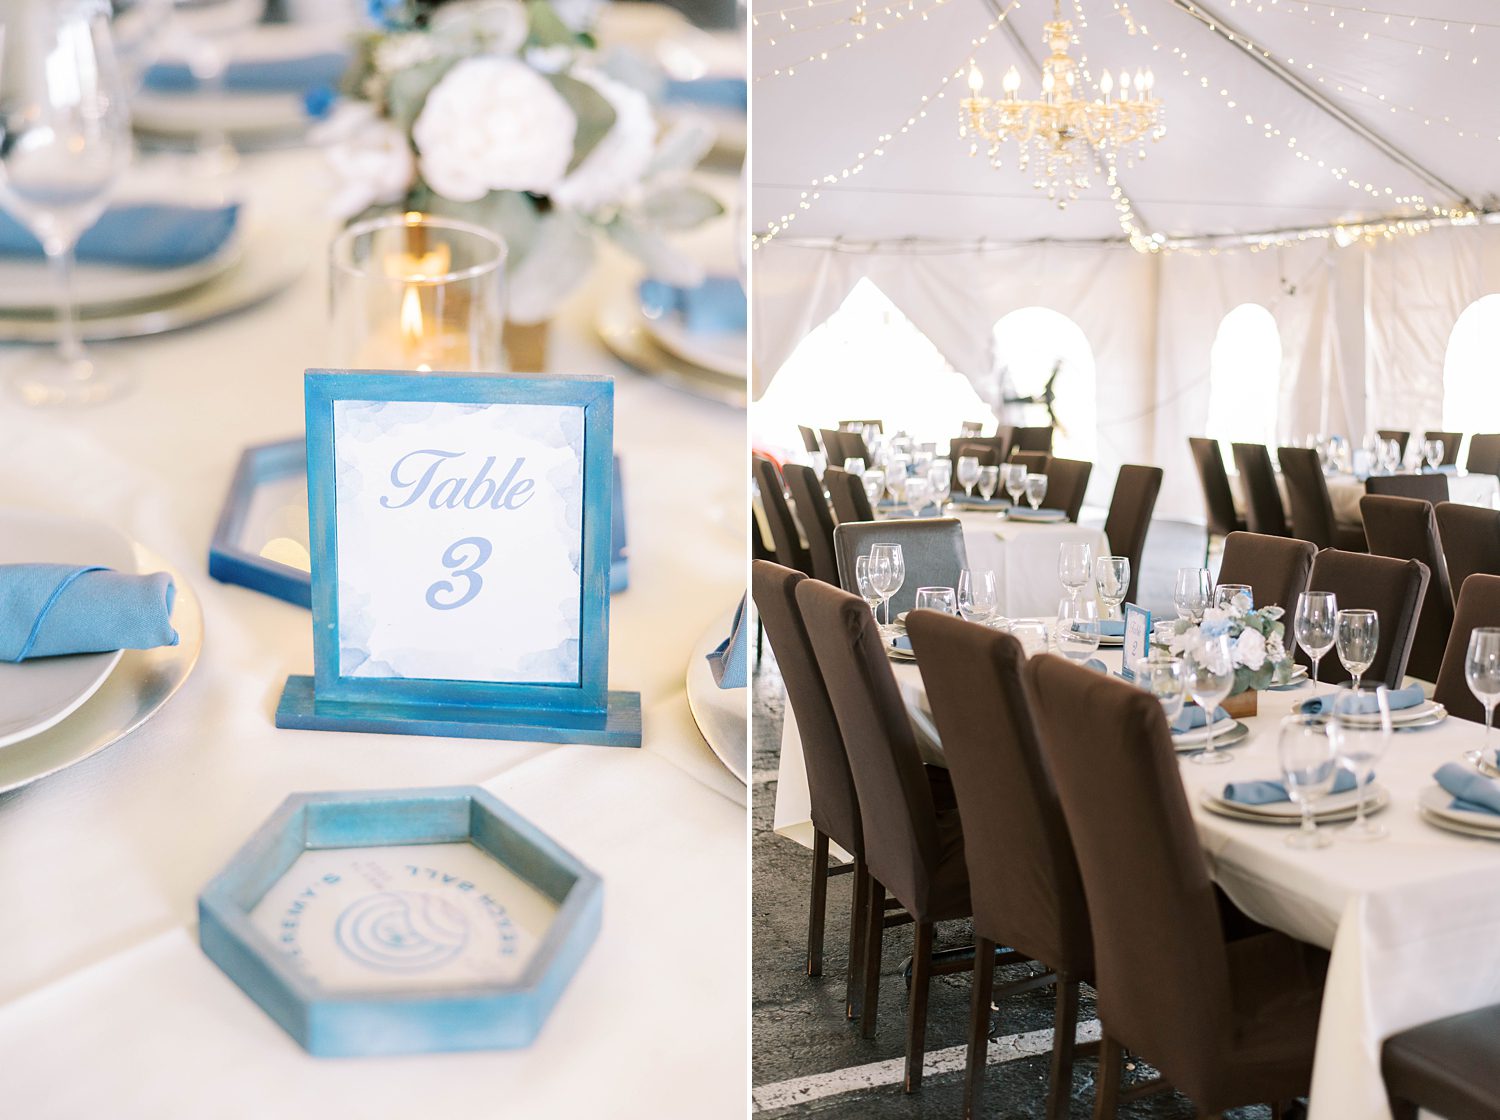 blue and white table numbers for wedding reception at Cafe Gabbiano 